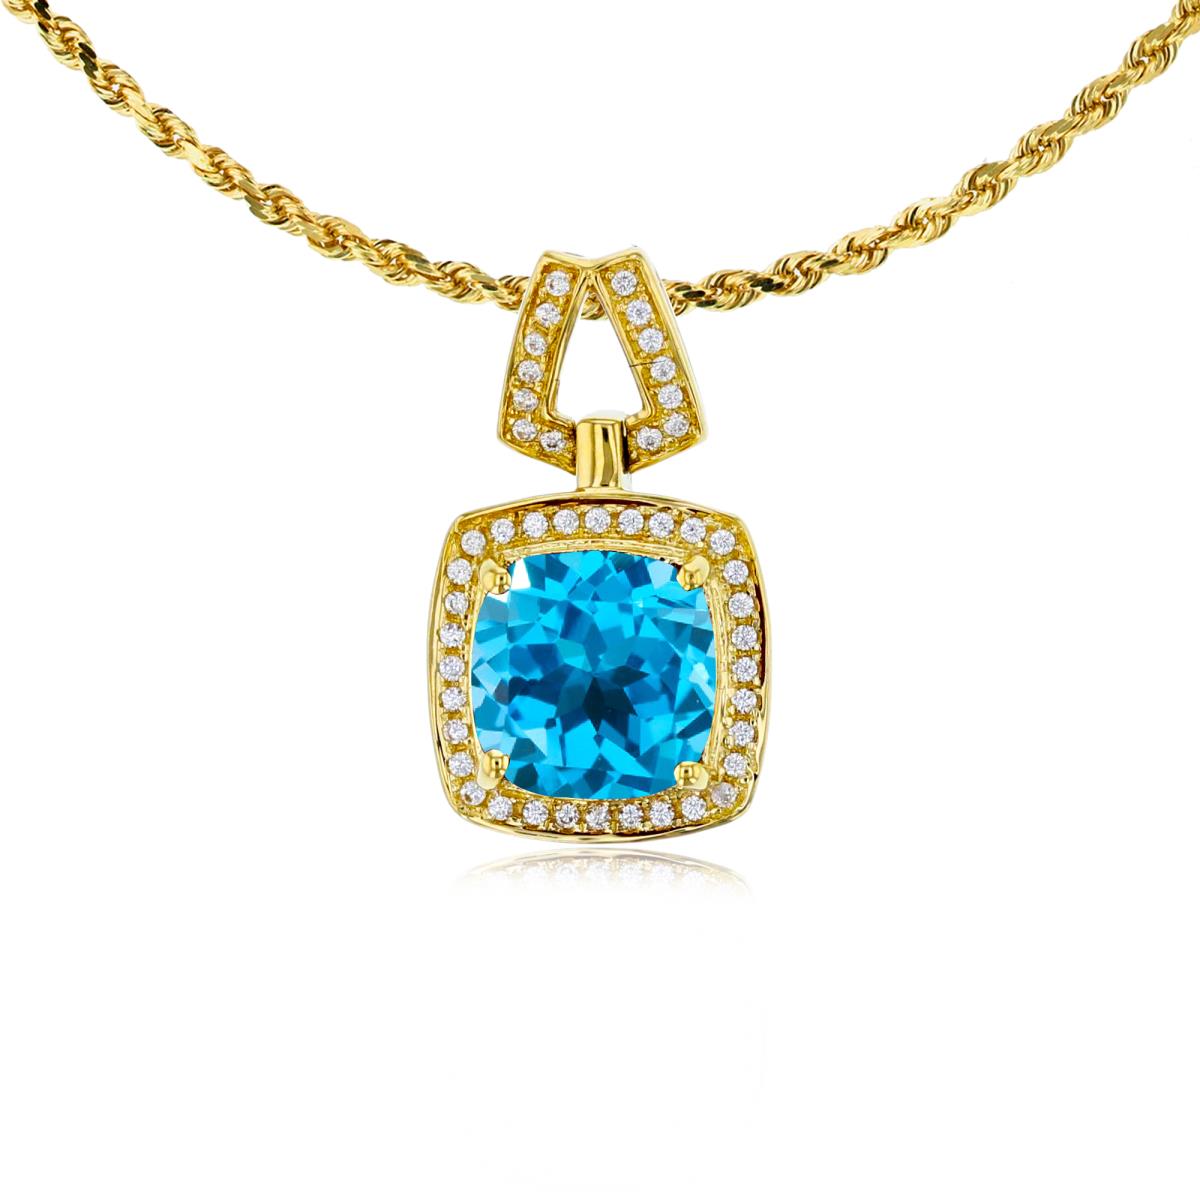 14K Yellow Gold 7mm Cushion Swiss Blue Topaz & 0.10 CTTW Diamond Halo 18" Rope Chain Necklace